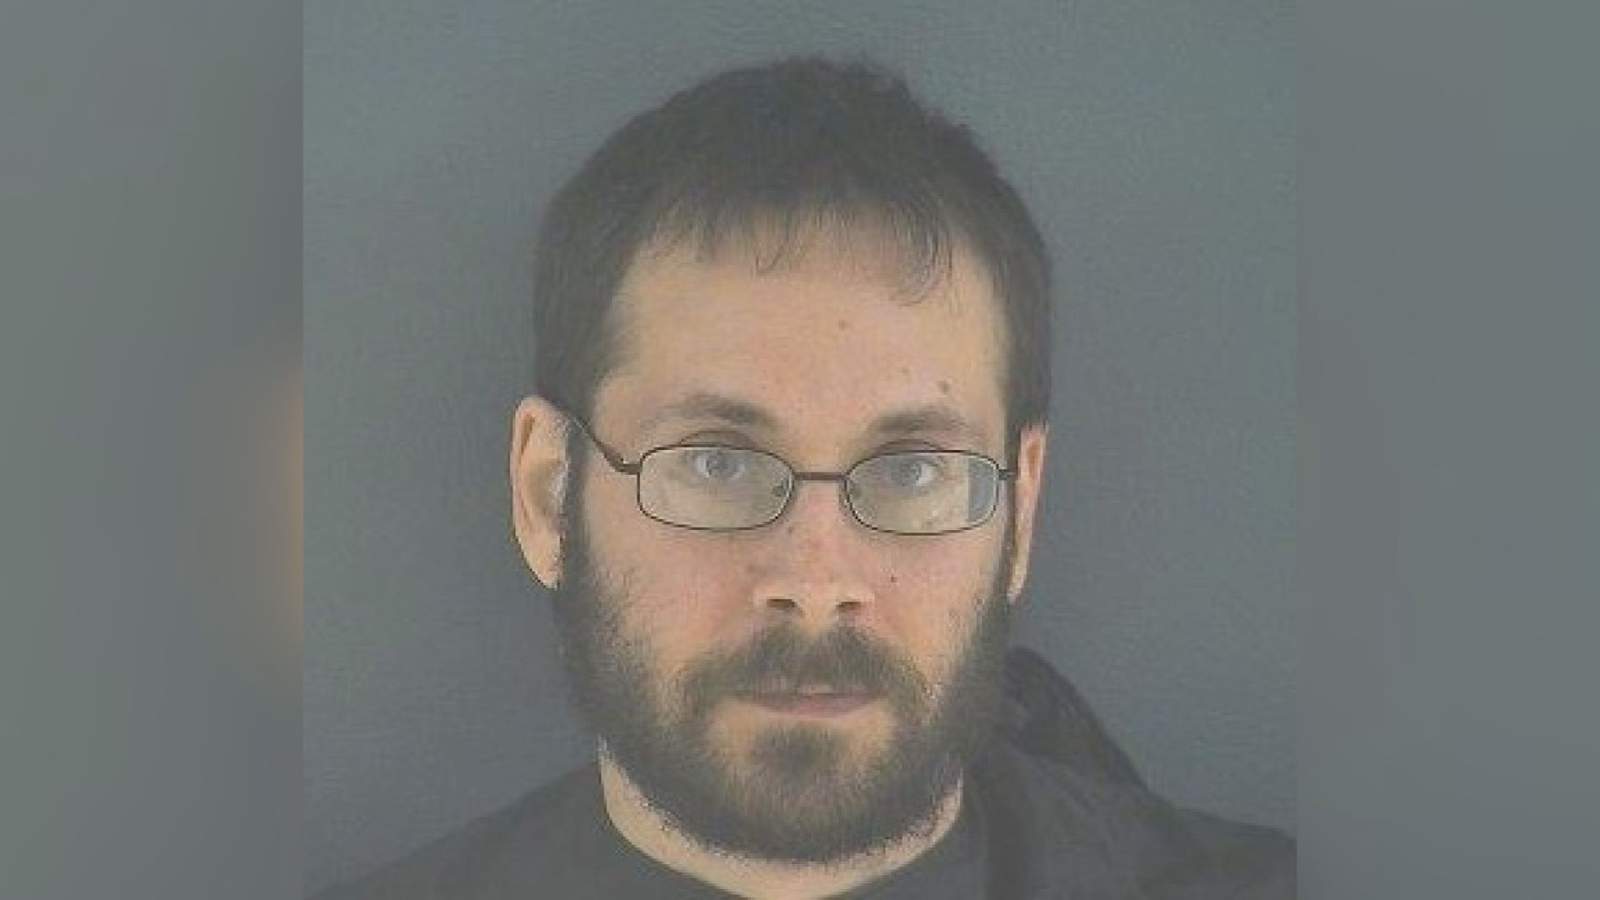 Bedford County man charged with “animate object penetration”